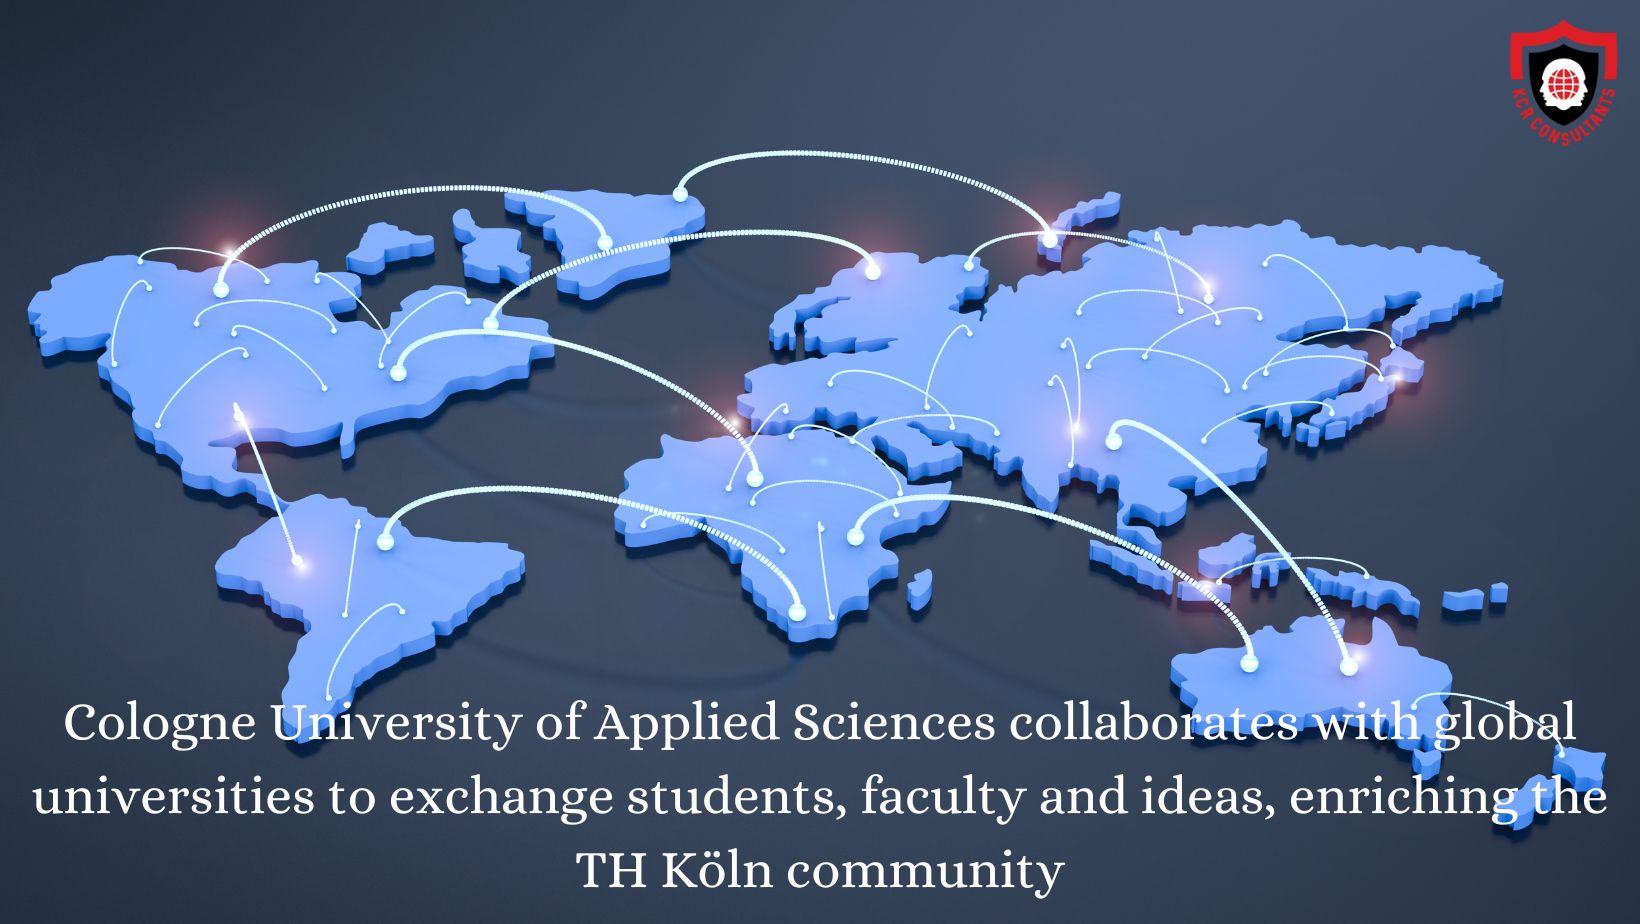 COLOGNE UNIVERSITY OF APPLIED SCIENCES - KCR CONSULTANTS - Global partnership